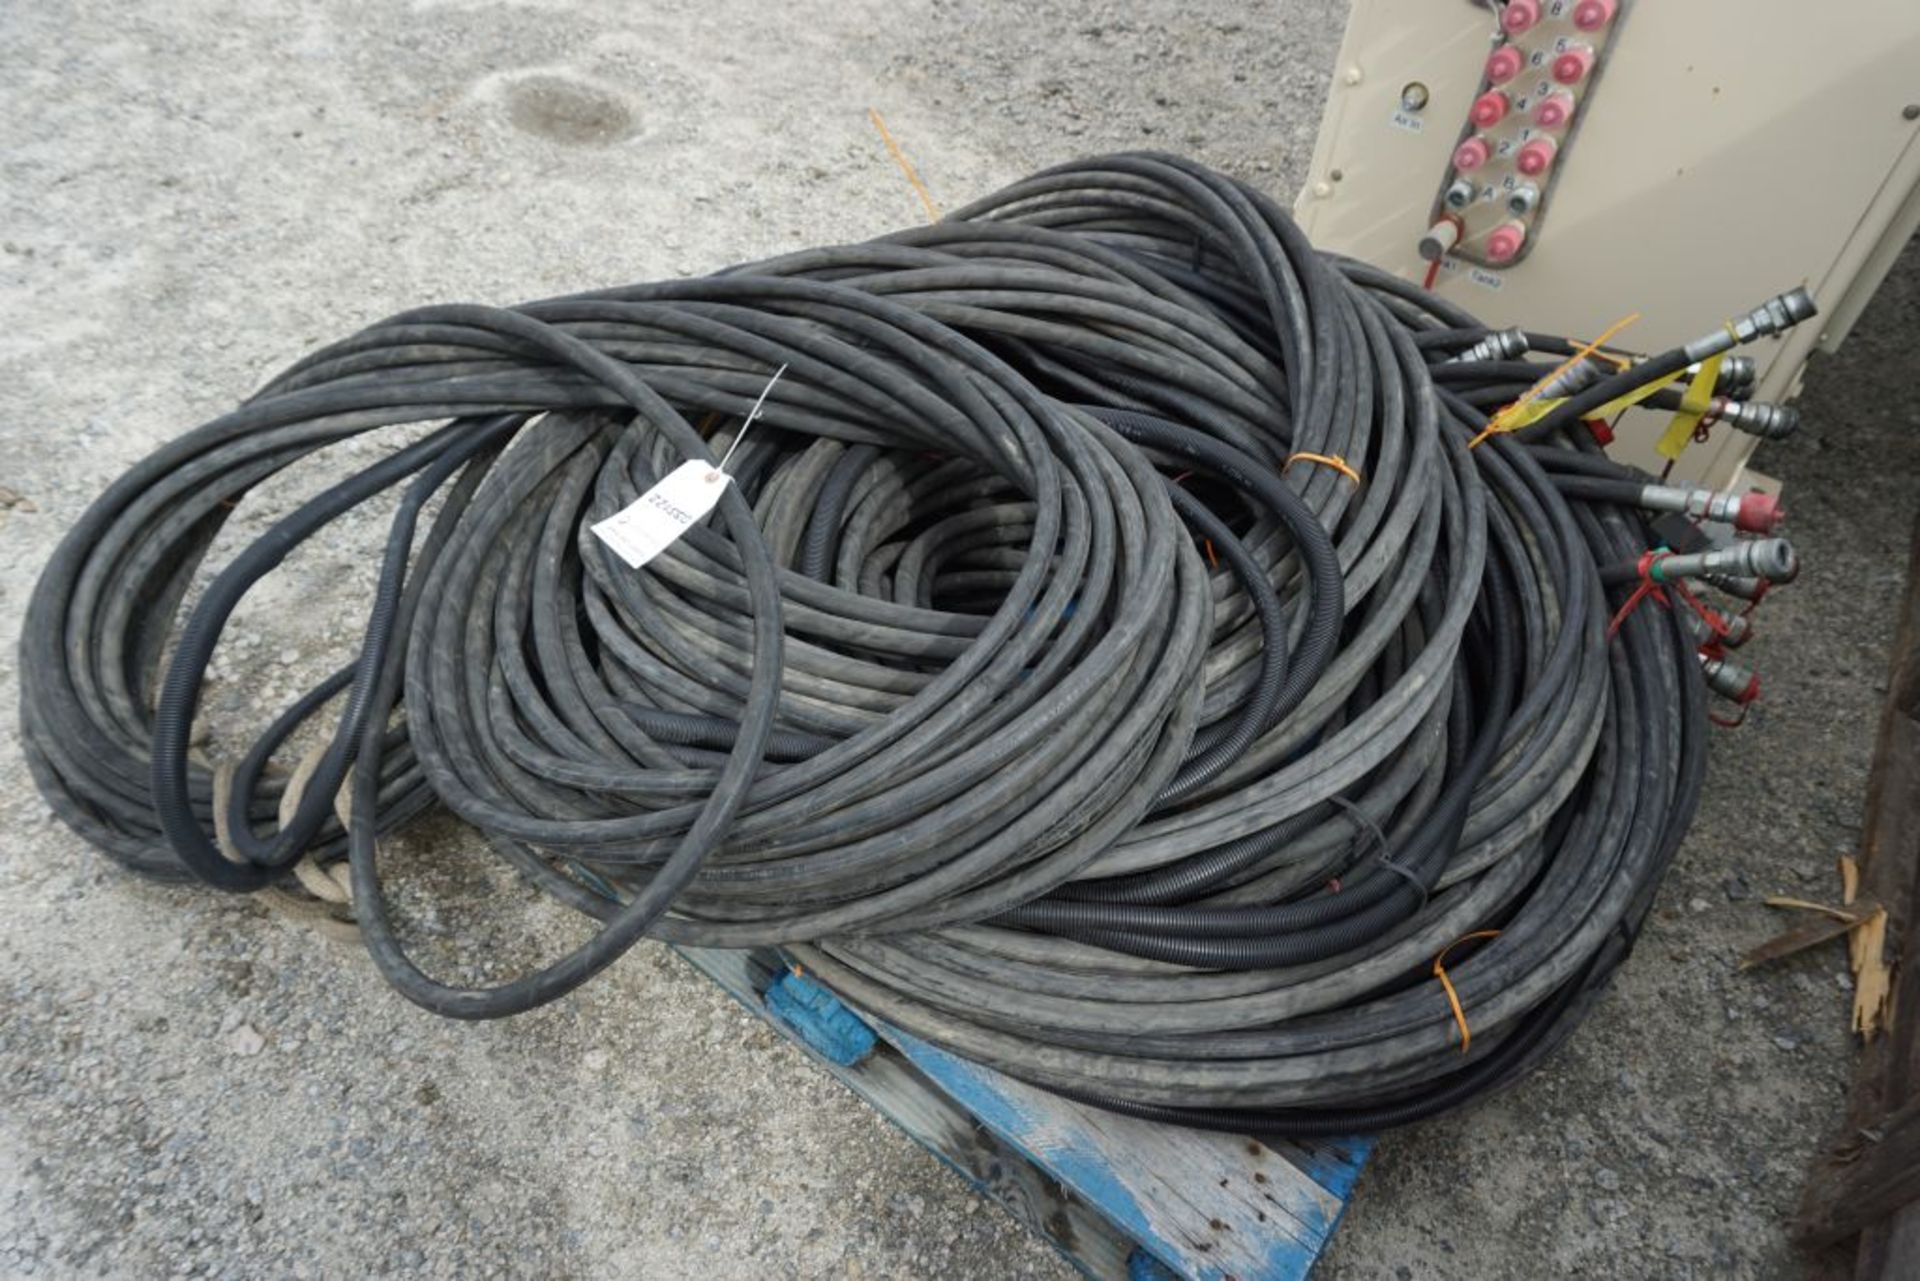 Lot of Hoses for Hydraulic Fluid for Booms, ETC - Tag: 220550 - Image 2 of 26